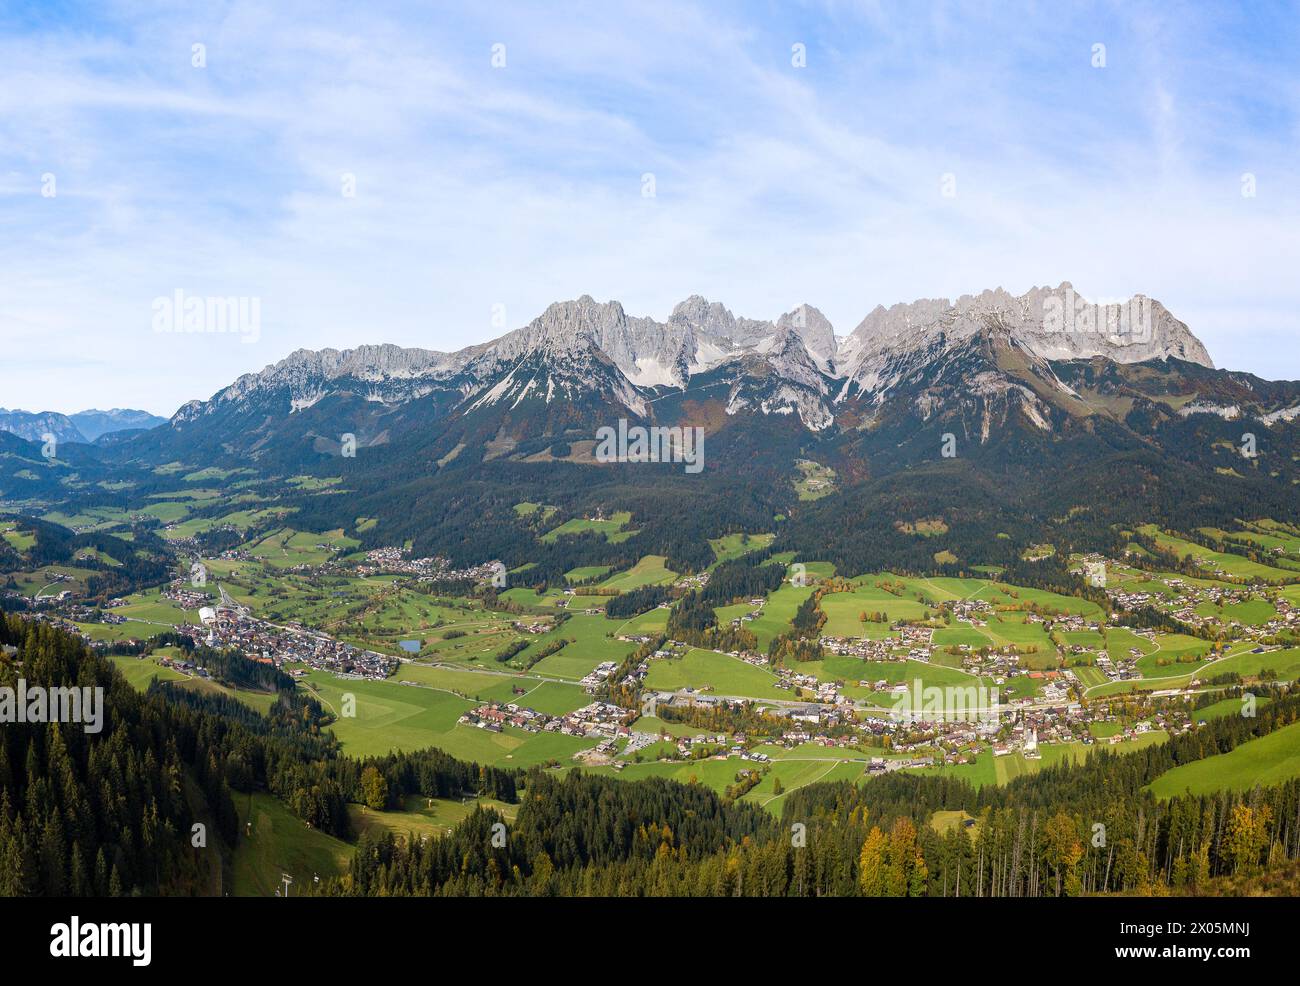 Aerial panorama image of the Wilder Kaiser mountain range and the villages in the valley, Tirol, Austria Stock Photo